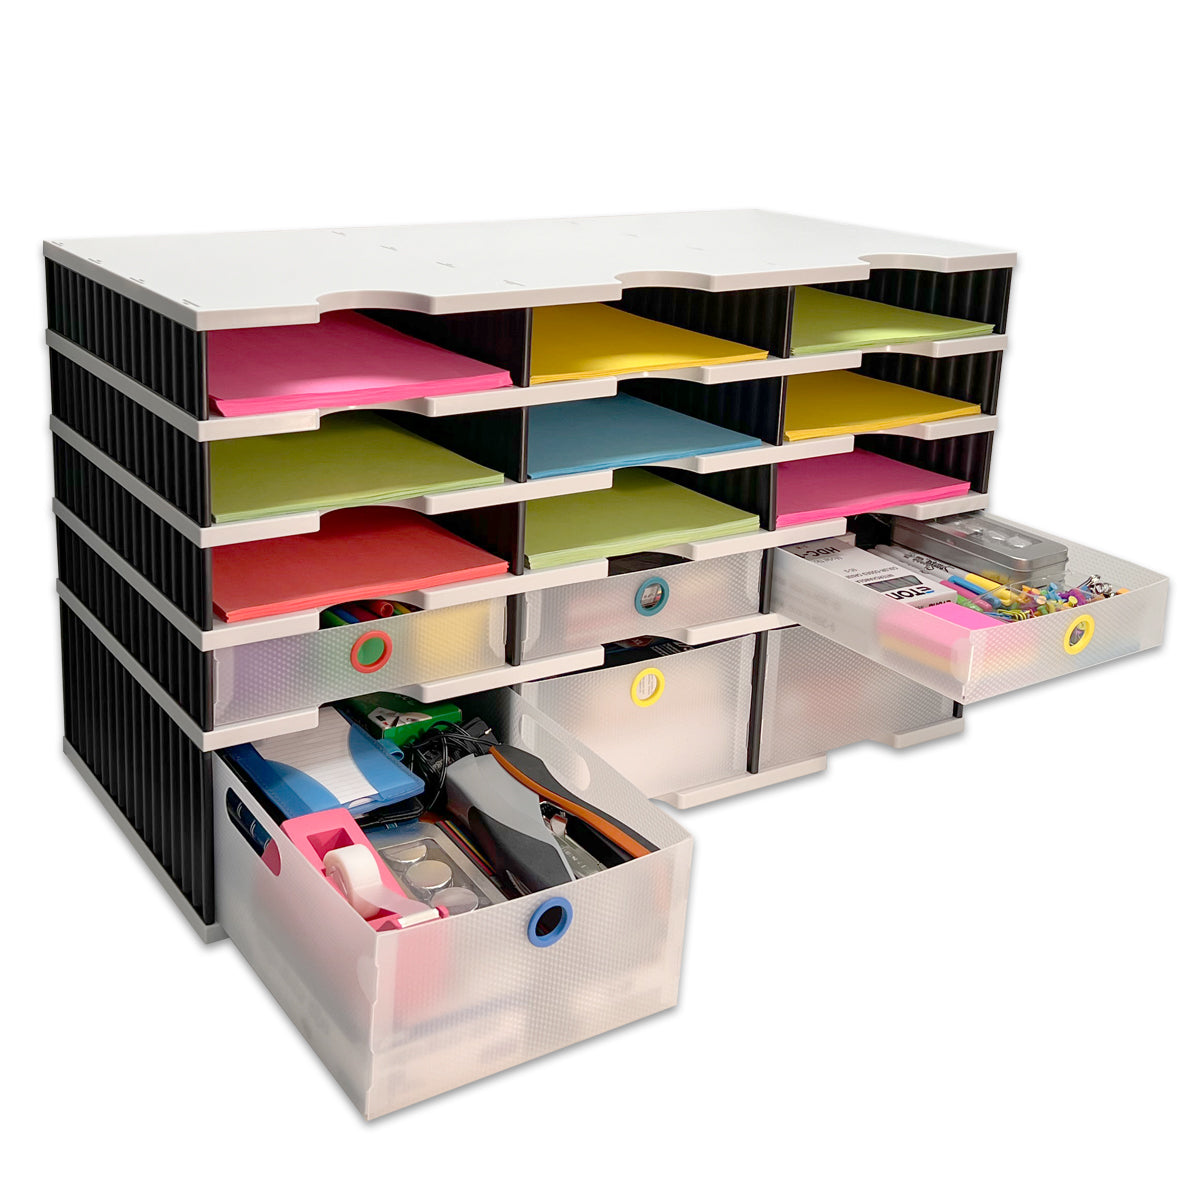 Desktop Organizer 12 Letter Tray Sorter Plus Riser Base, 3 Supply & 3 Storage Drawers - TierDrop Plus Keeps All of Your Documents & Supplies in Clear